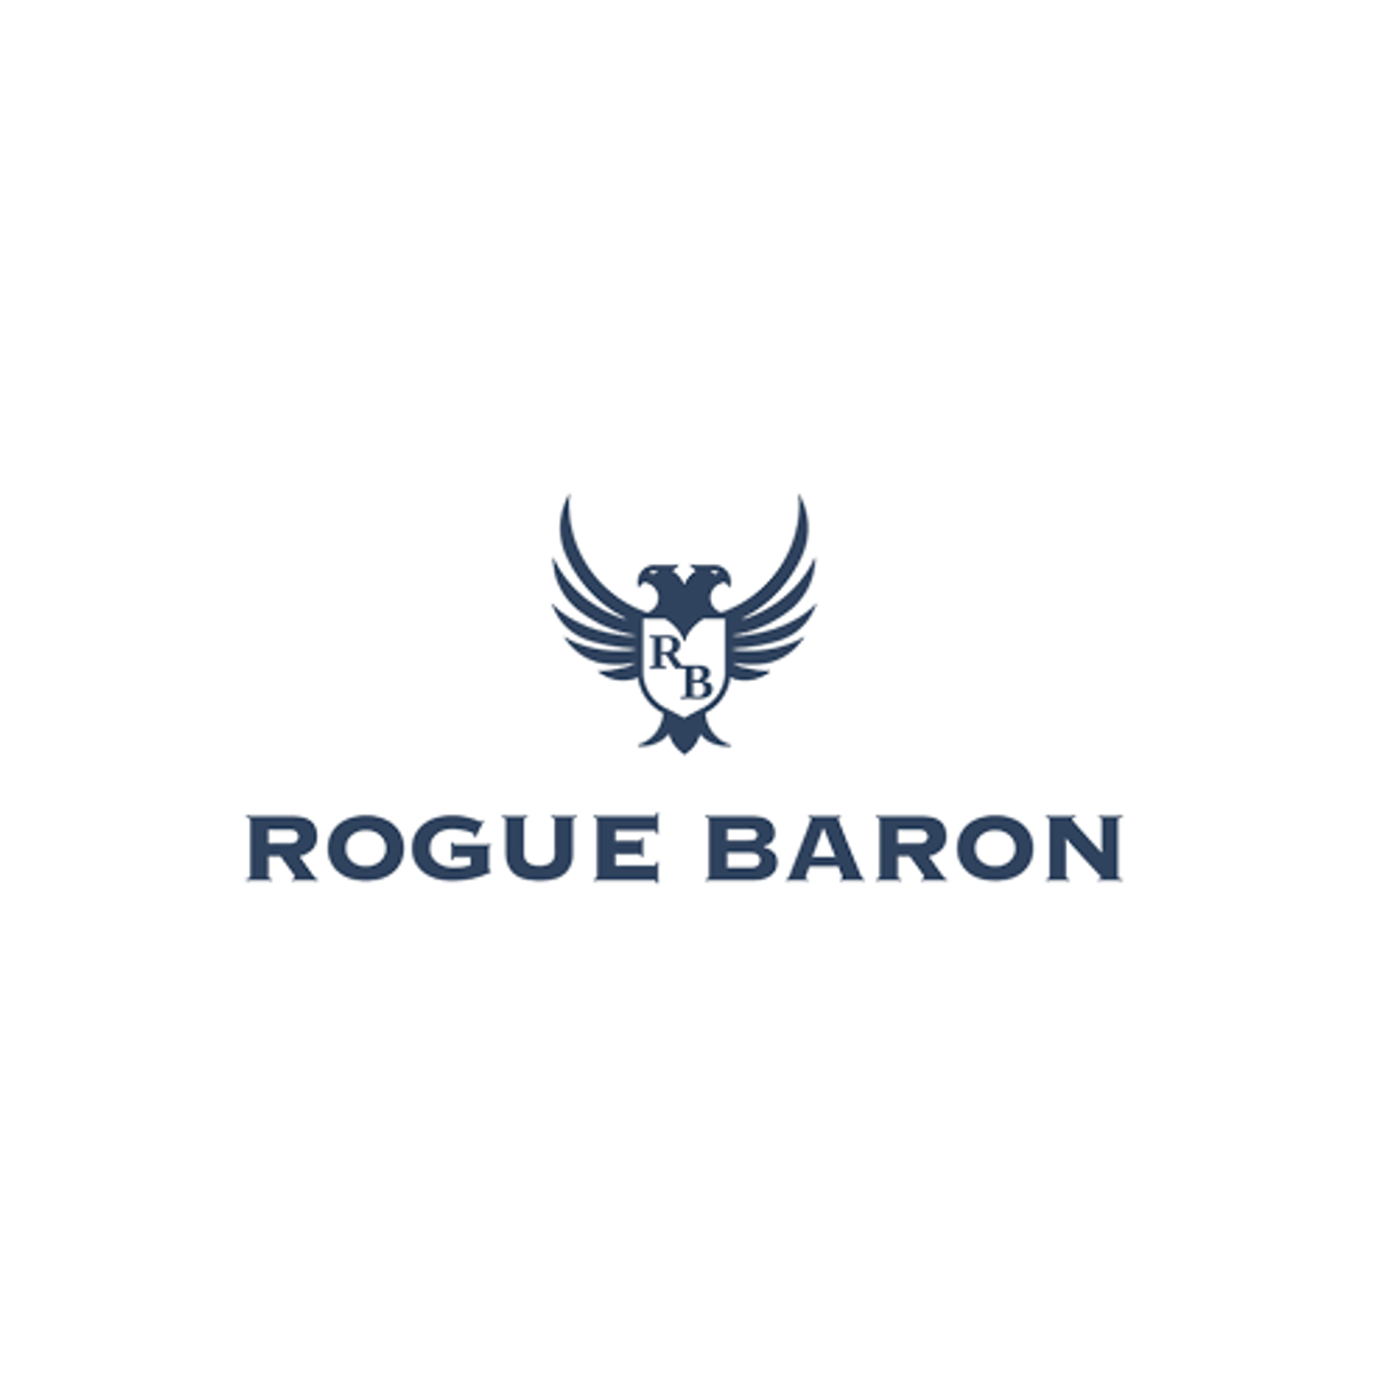 1888: Rogue Baron Q&A: "We stick to areas where we think we've got a competitive advantage"